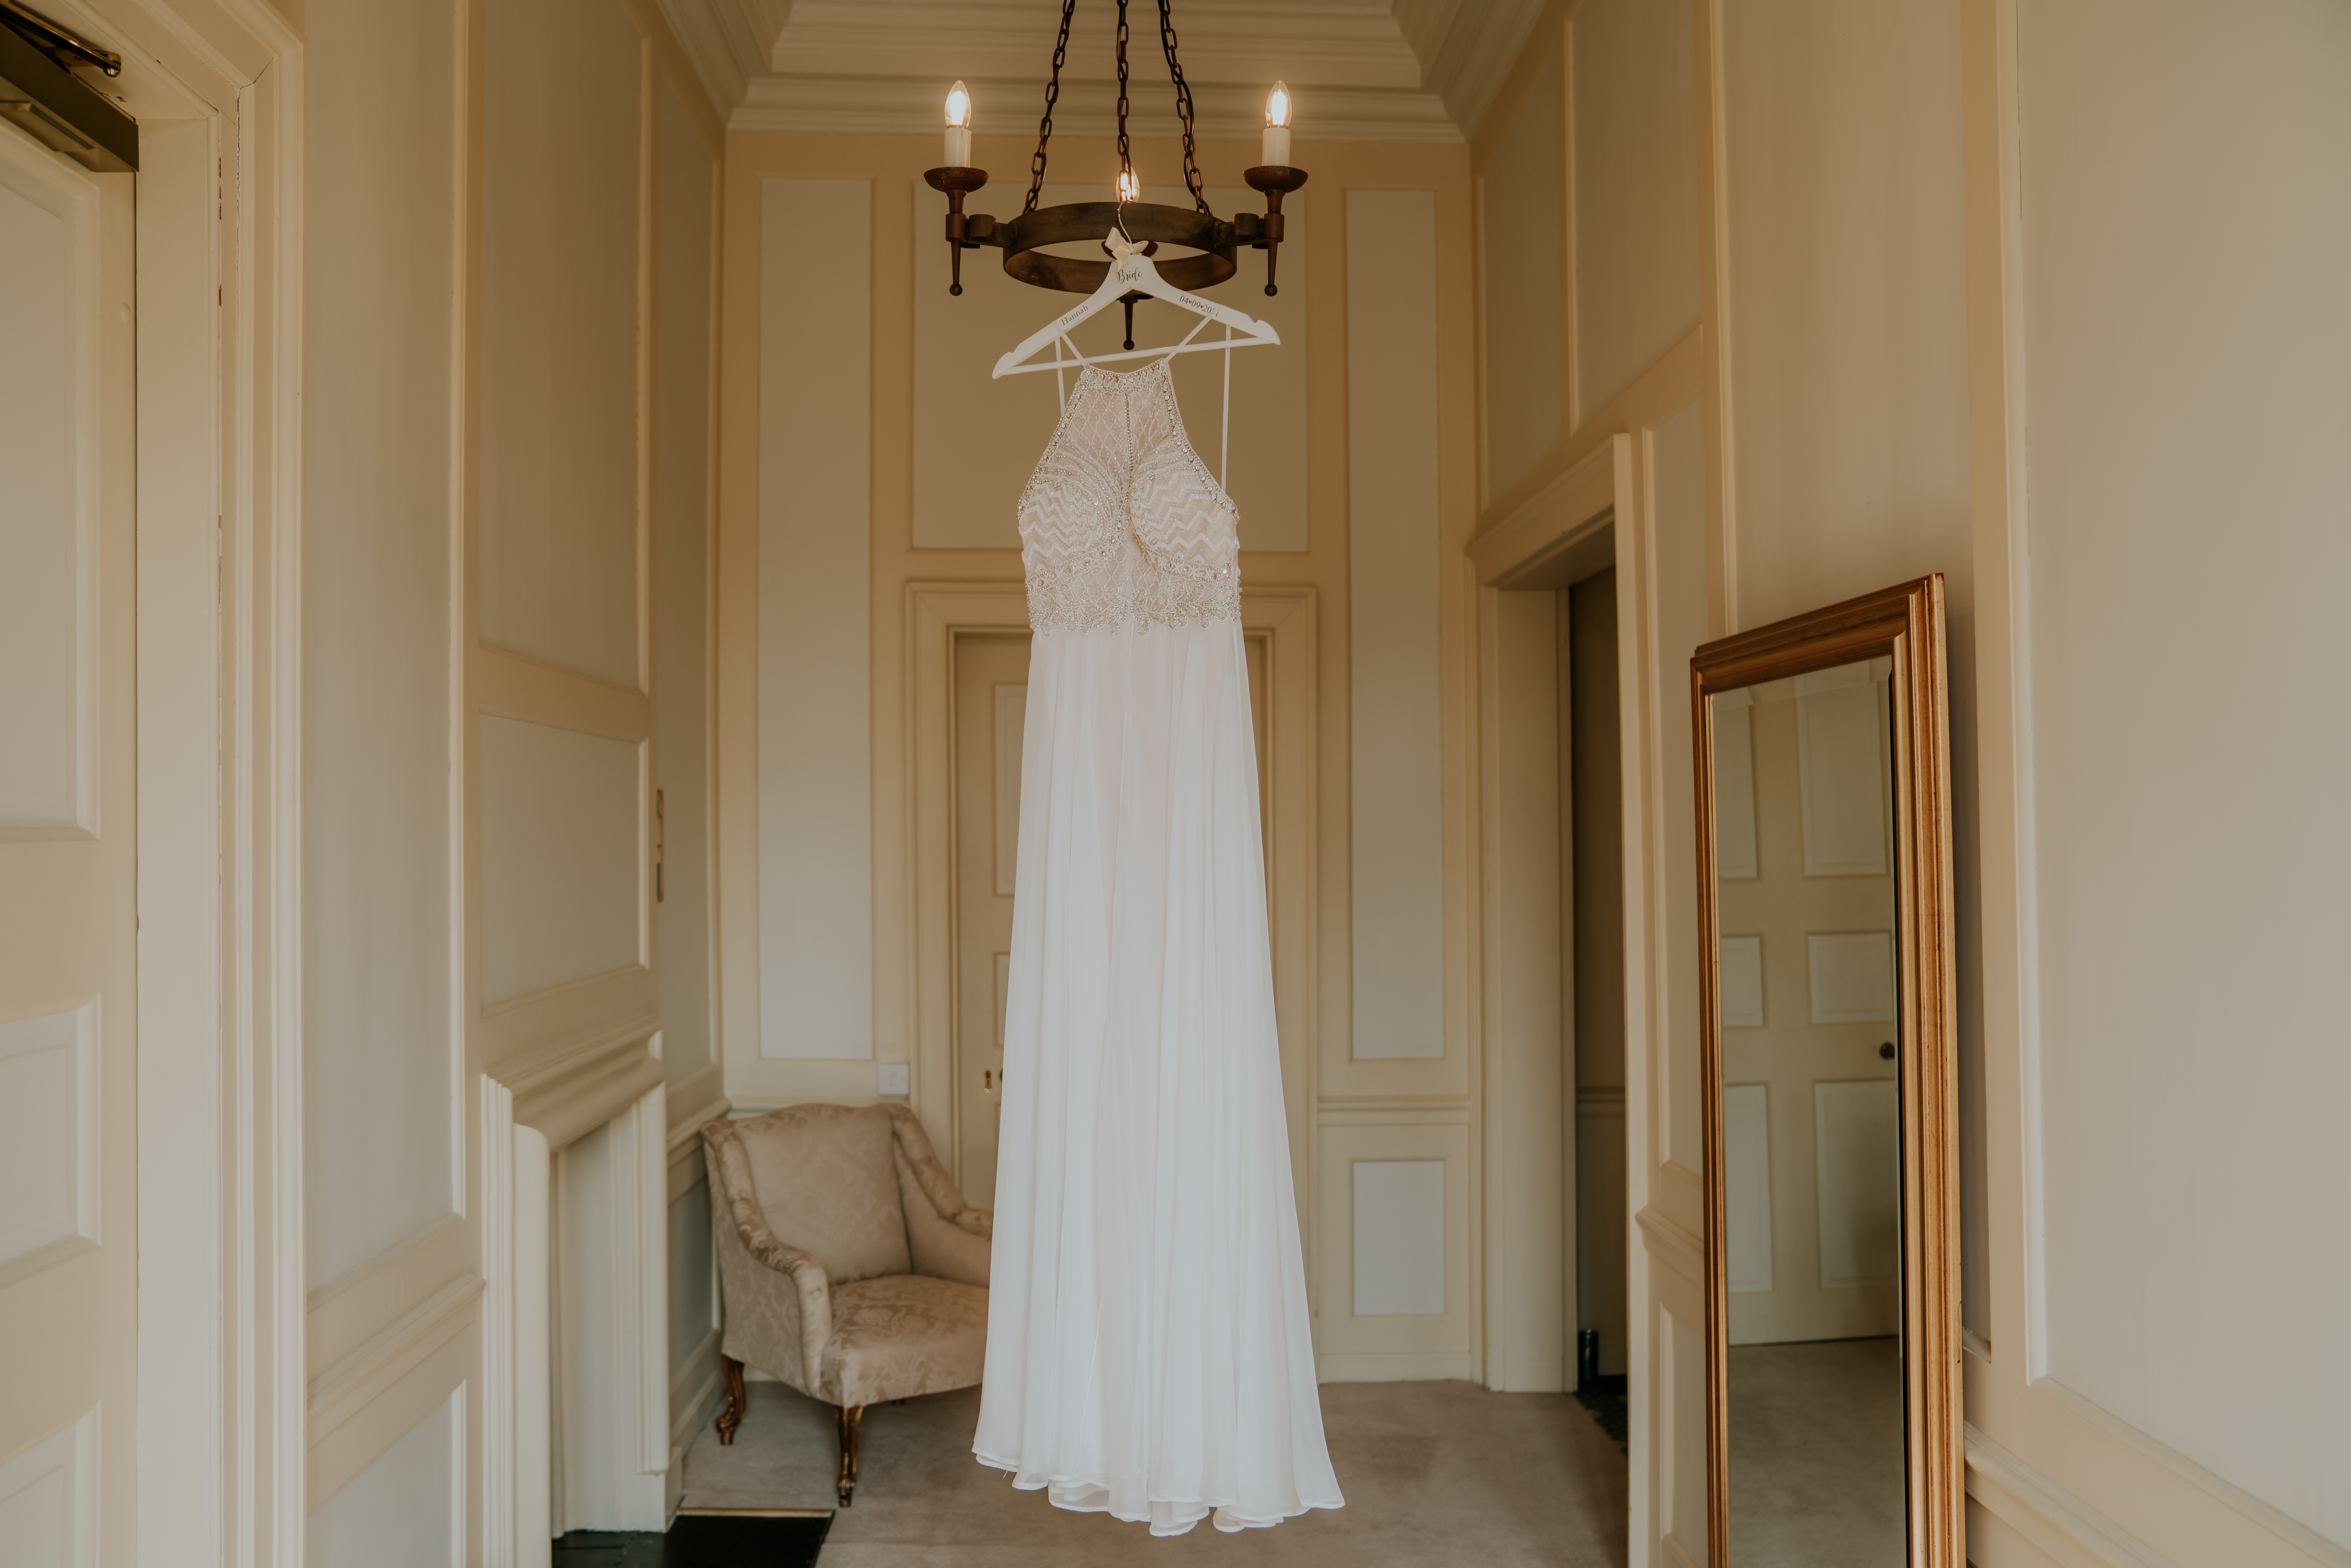 Second wedding dress hanging from light fitting